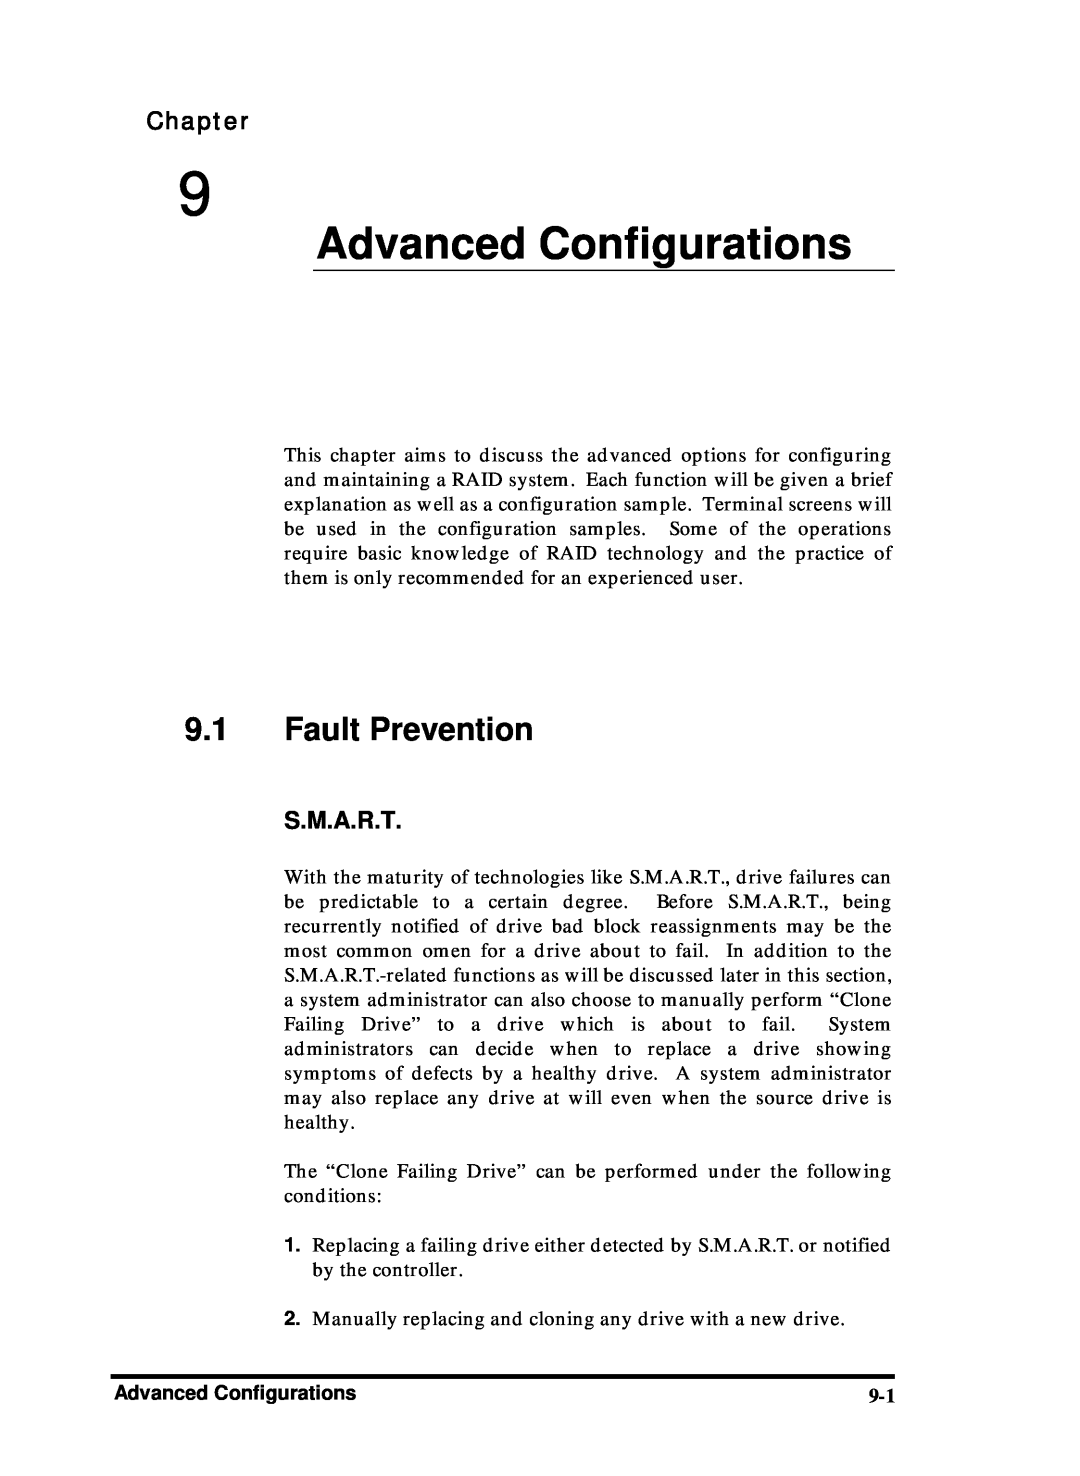 Compaq Infortrend manual Advanced Configurations, Fault Prevention, S.M.A.R.T, Chapter 